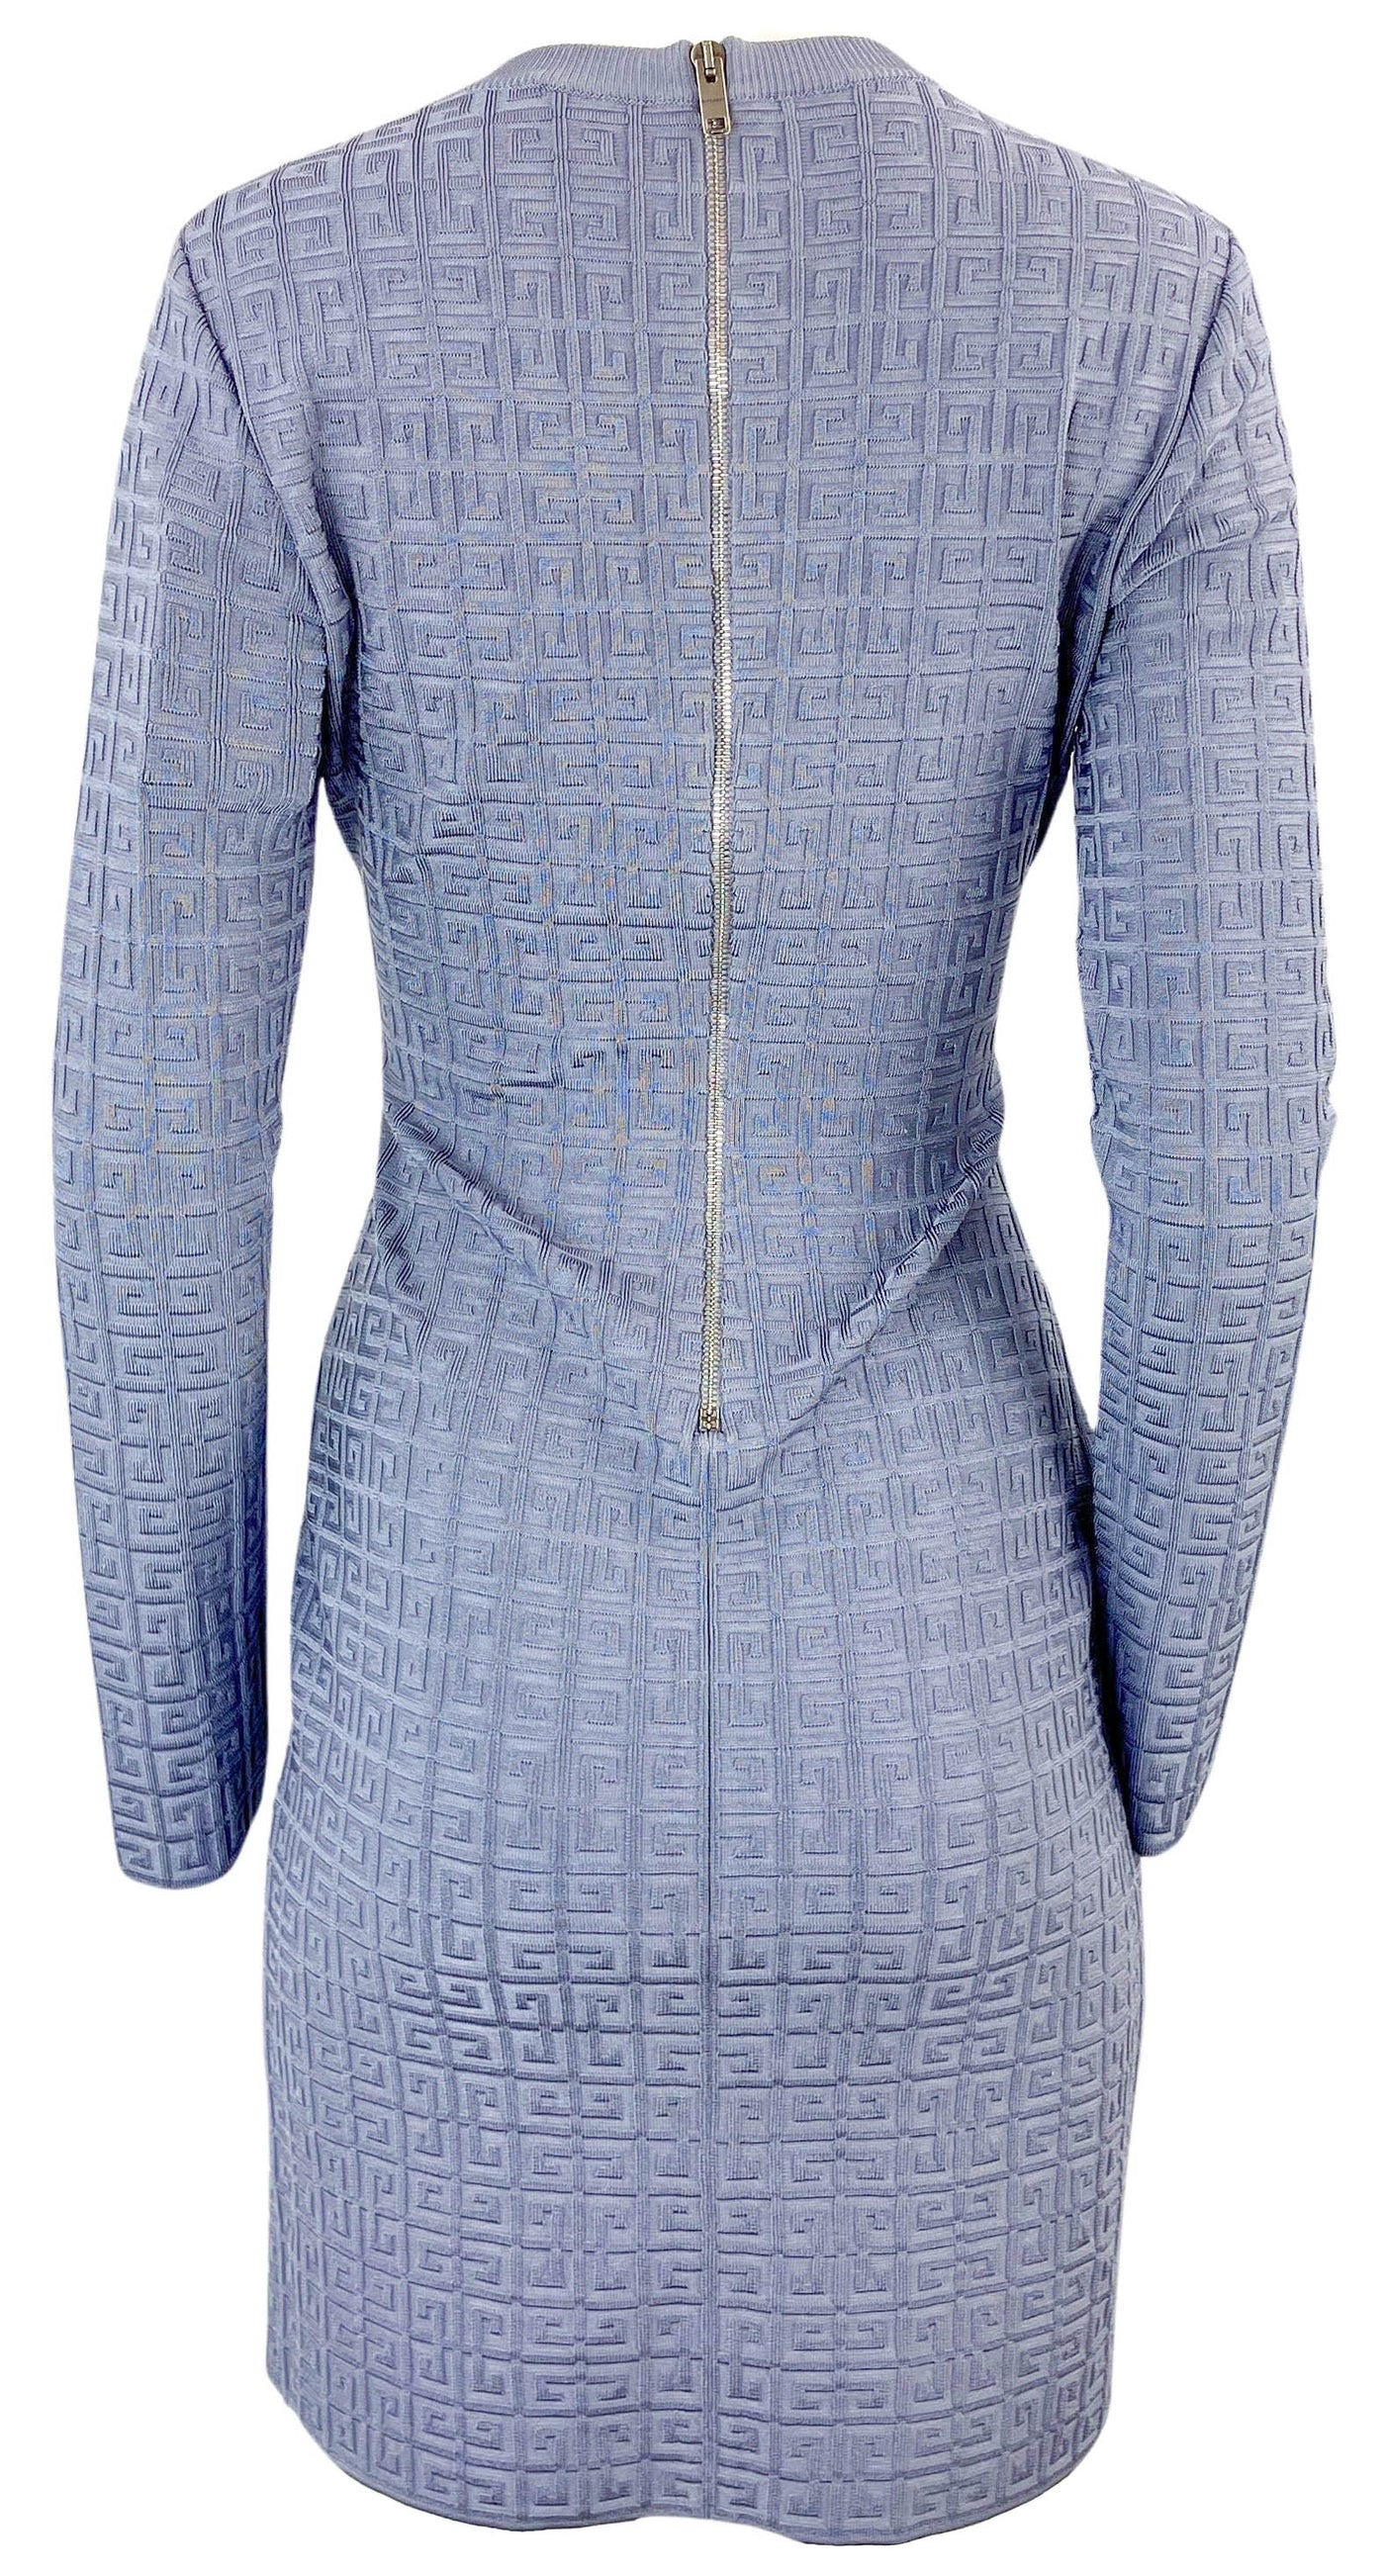 Givenchy Stretch-Knit Mini Dress in Mineral Blue - Discounts on Givenchy at UAL